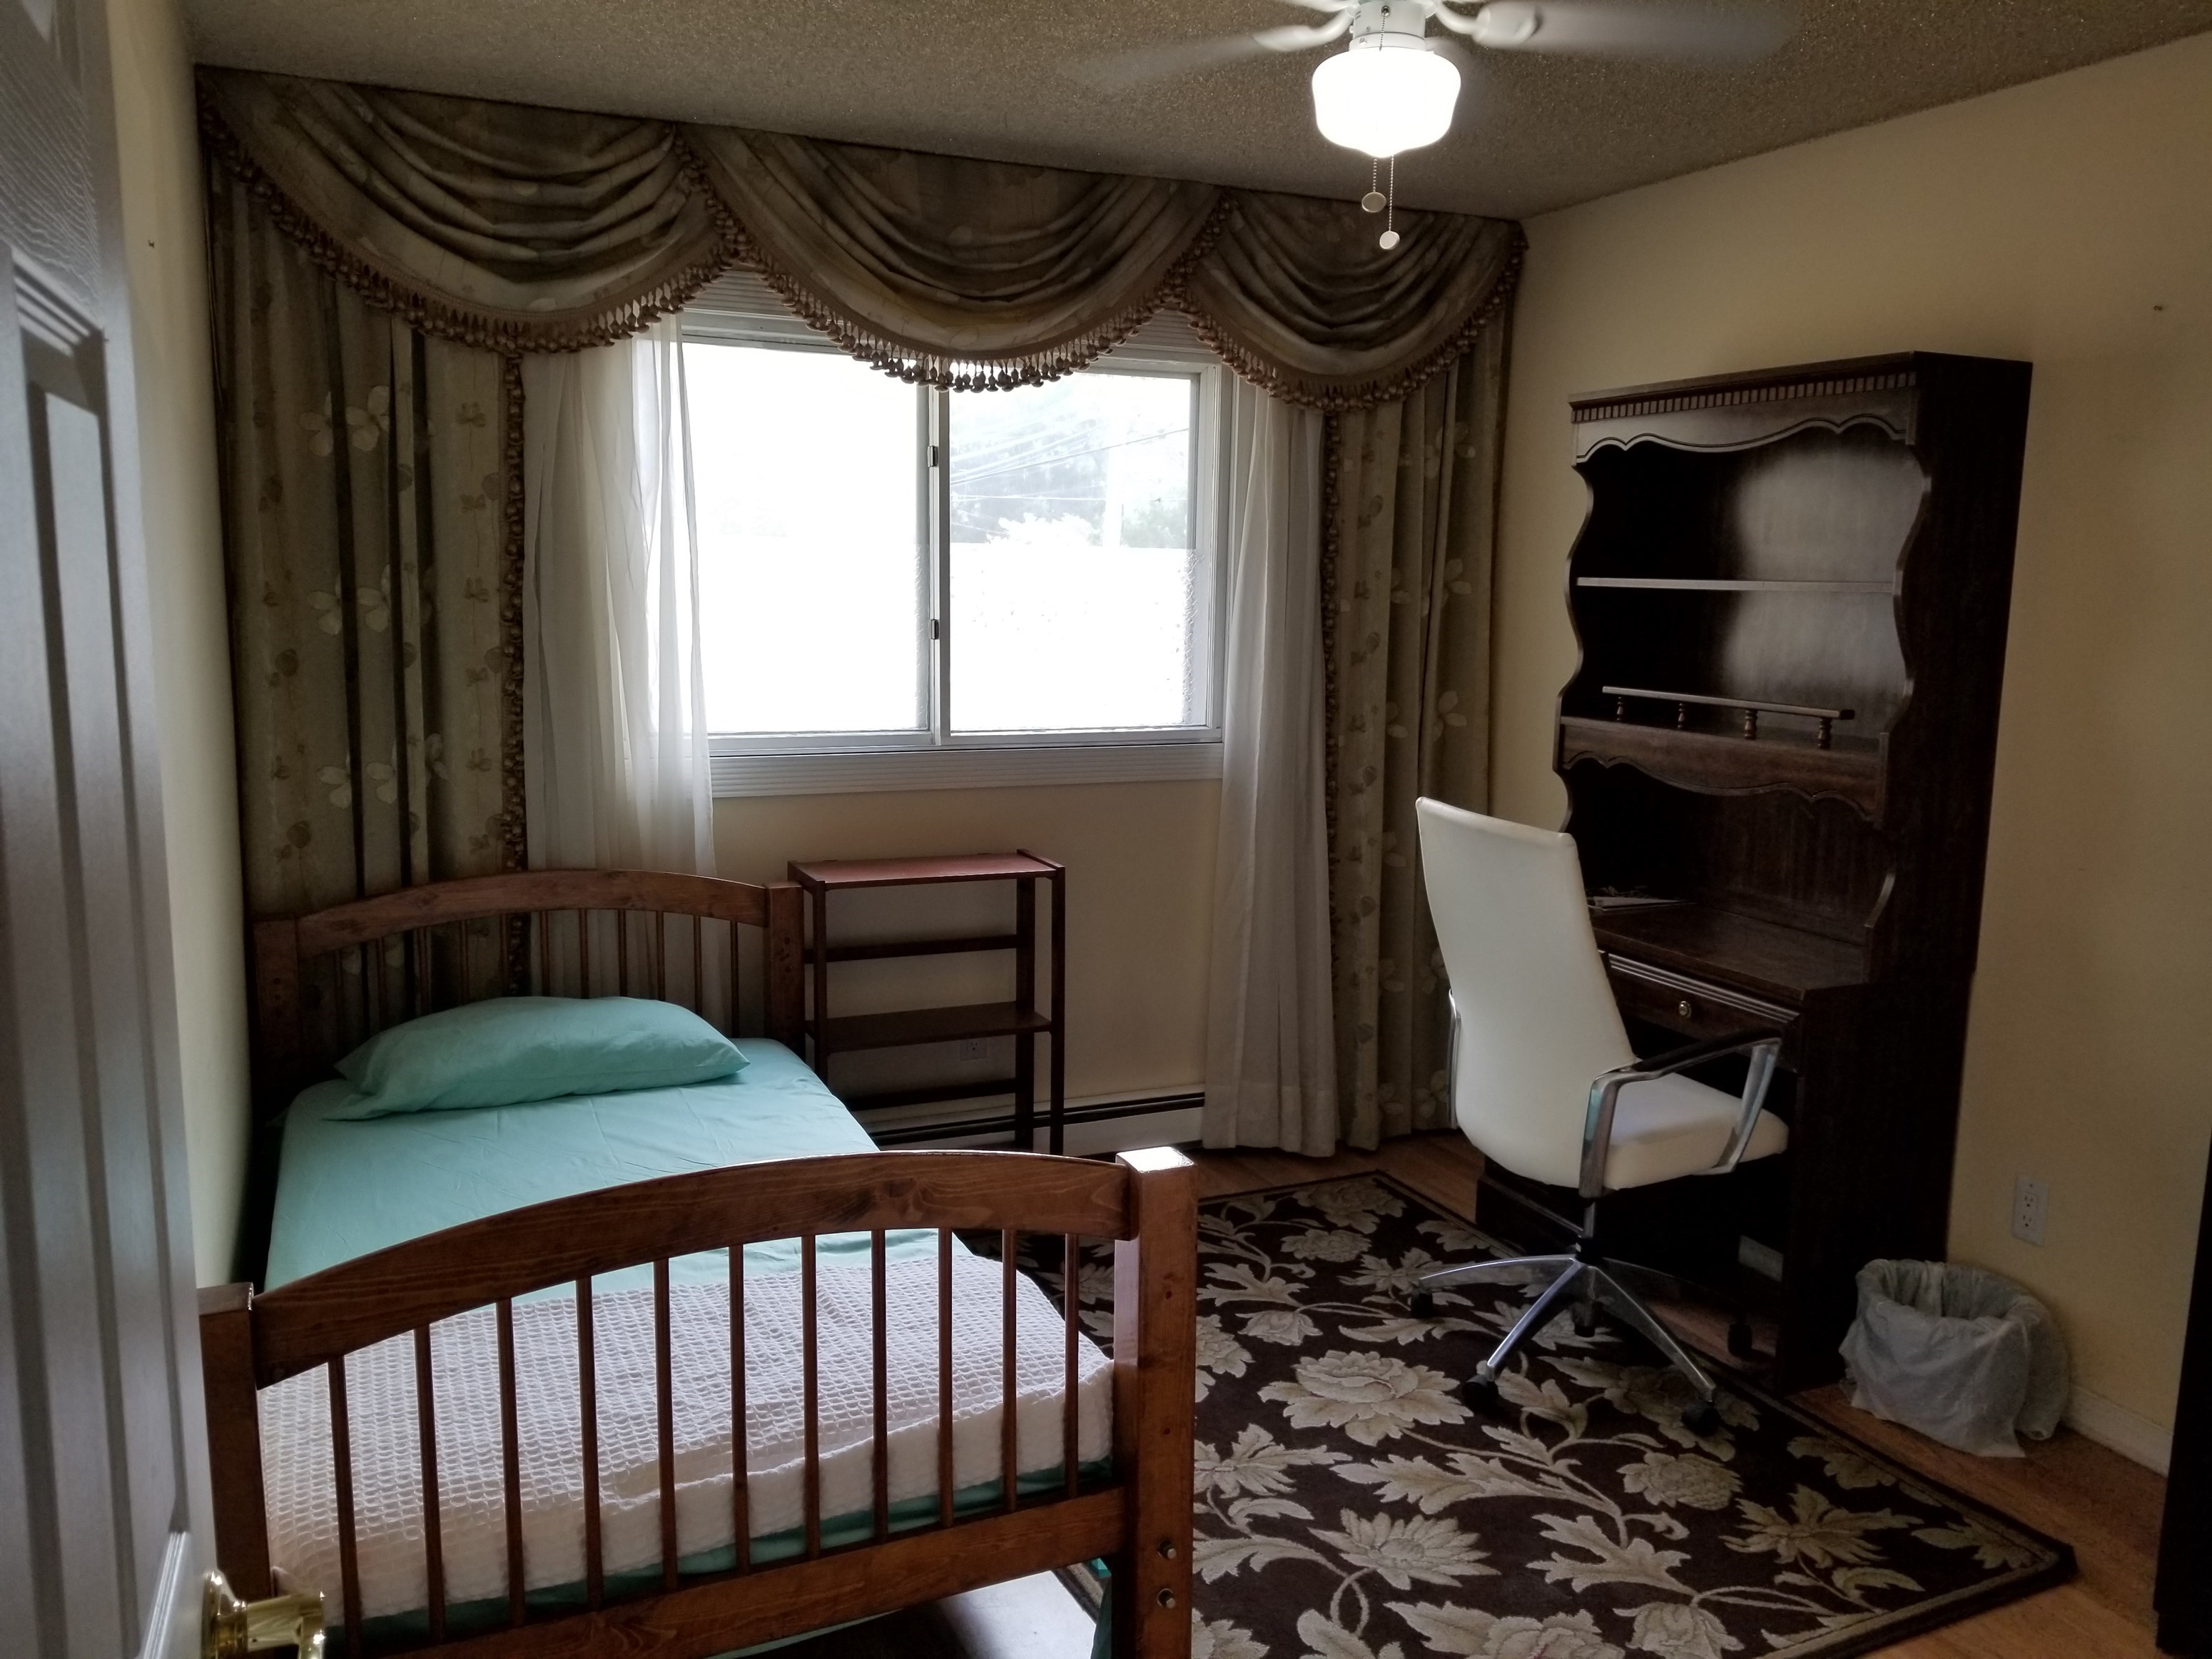 1 Bedroom For Rent With Parking Clifton Nj 1 Block To Nyc